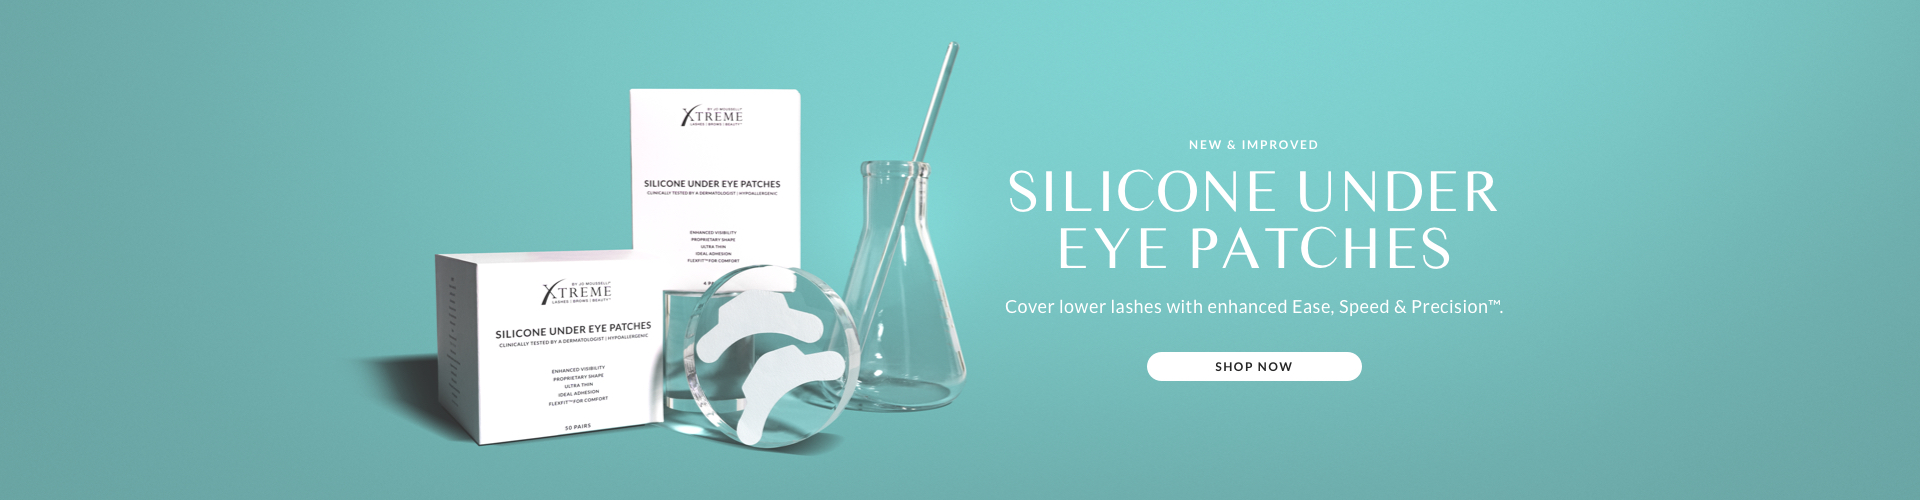 Silicone Under Eye Patches